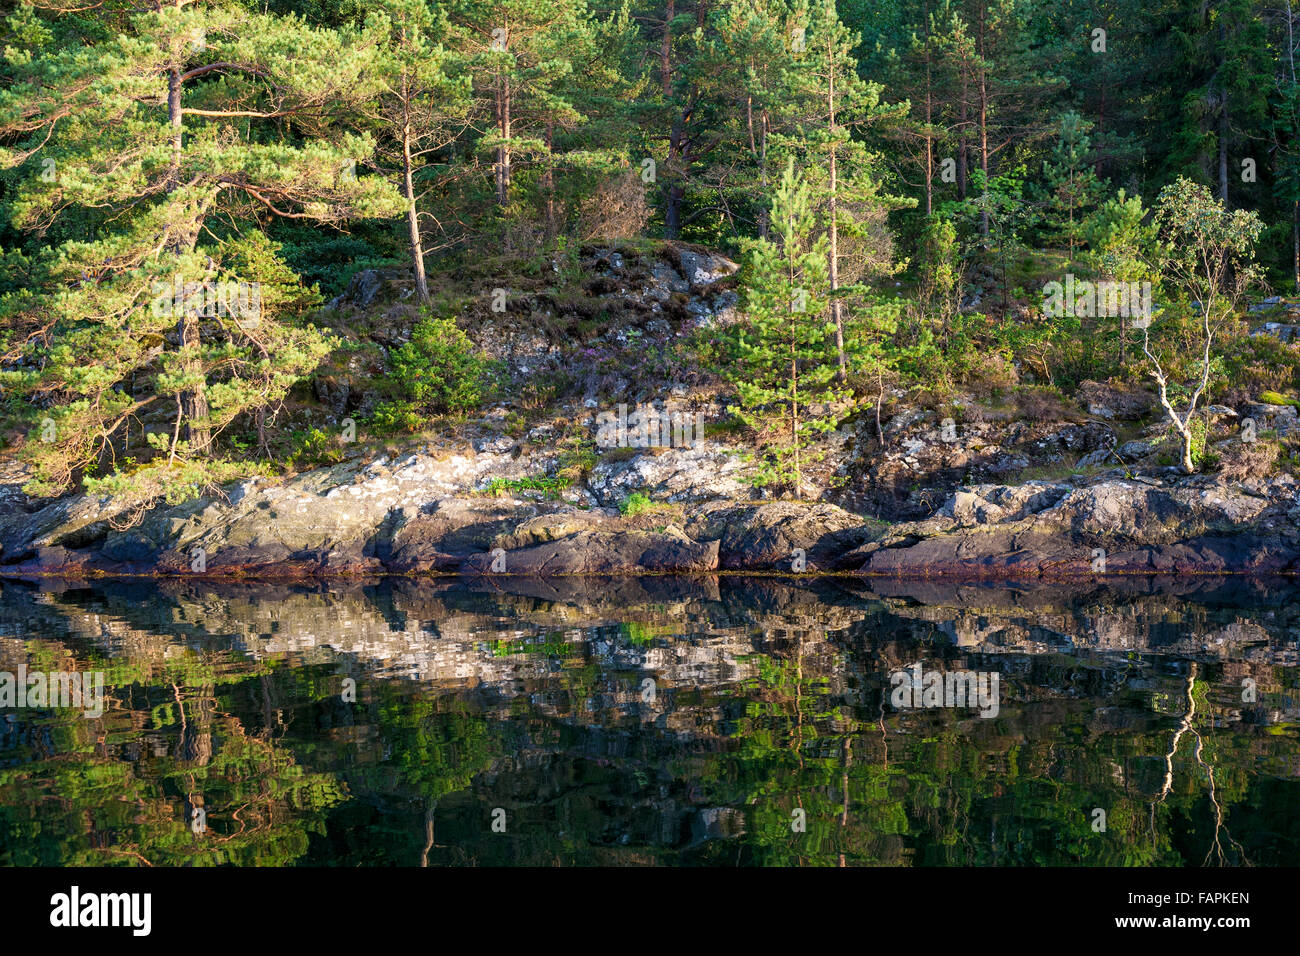 Pine forest and rocky terrain at edge of fjord Langøy, Kragerø, Norway Stock Photo